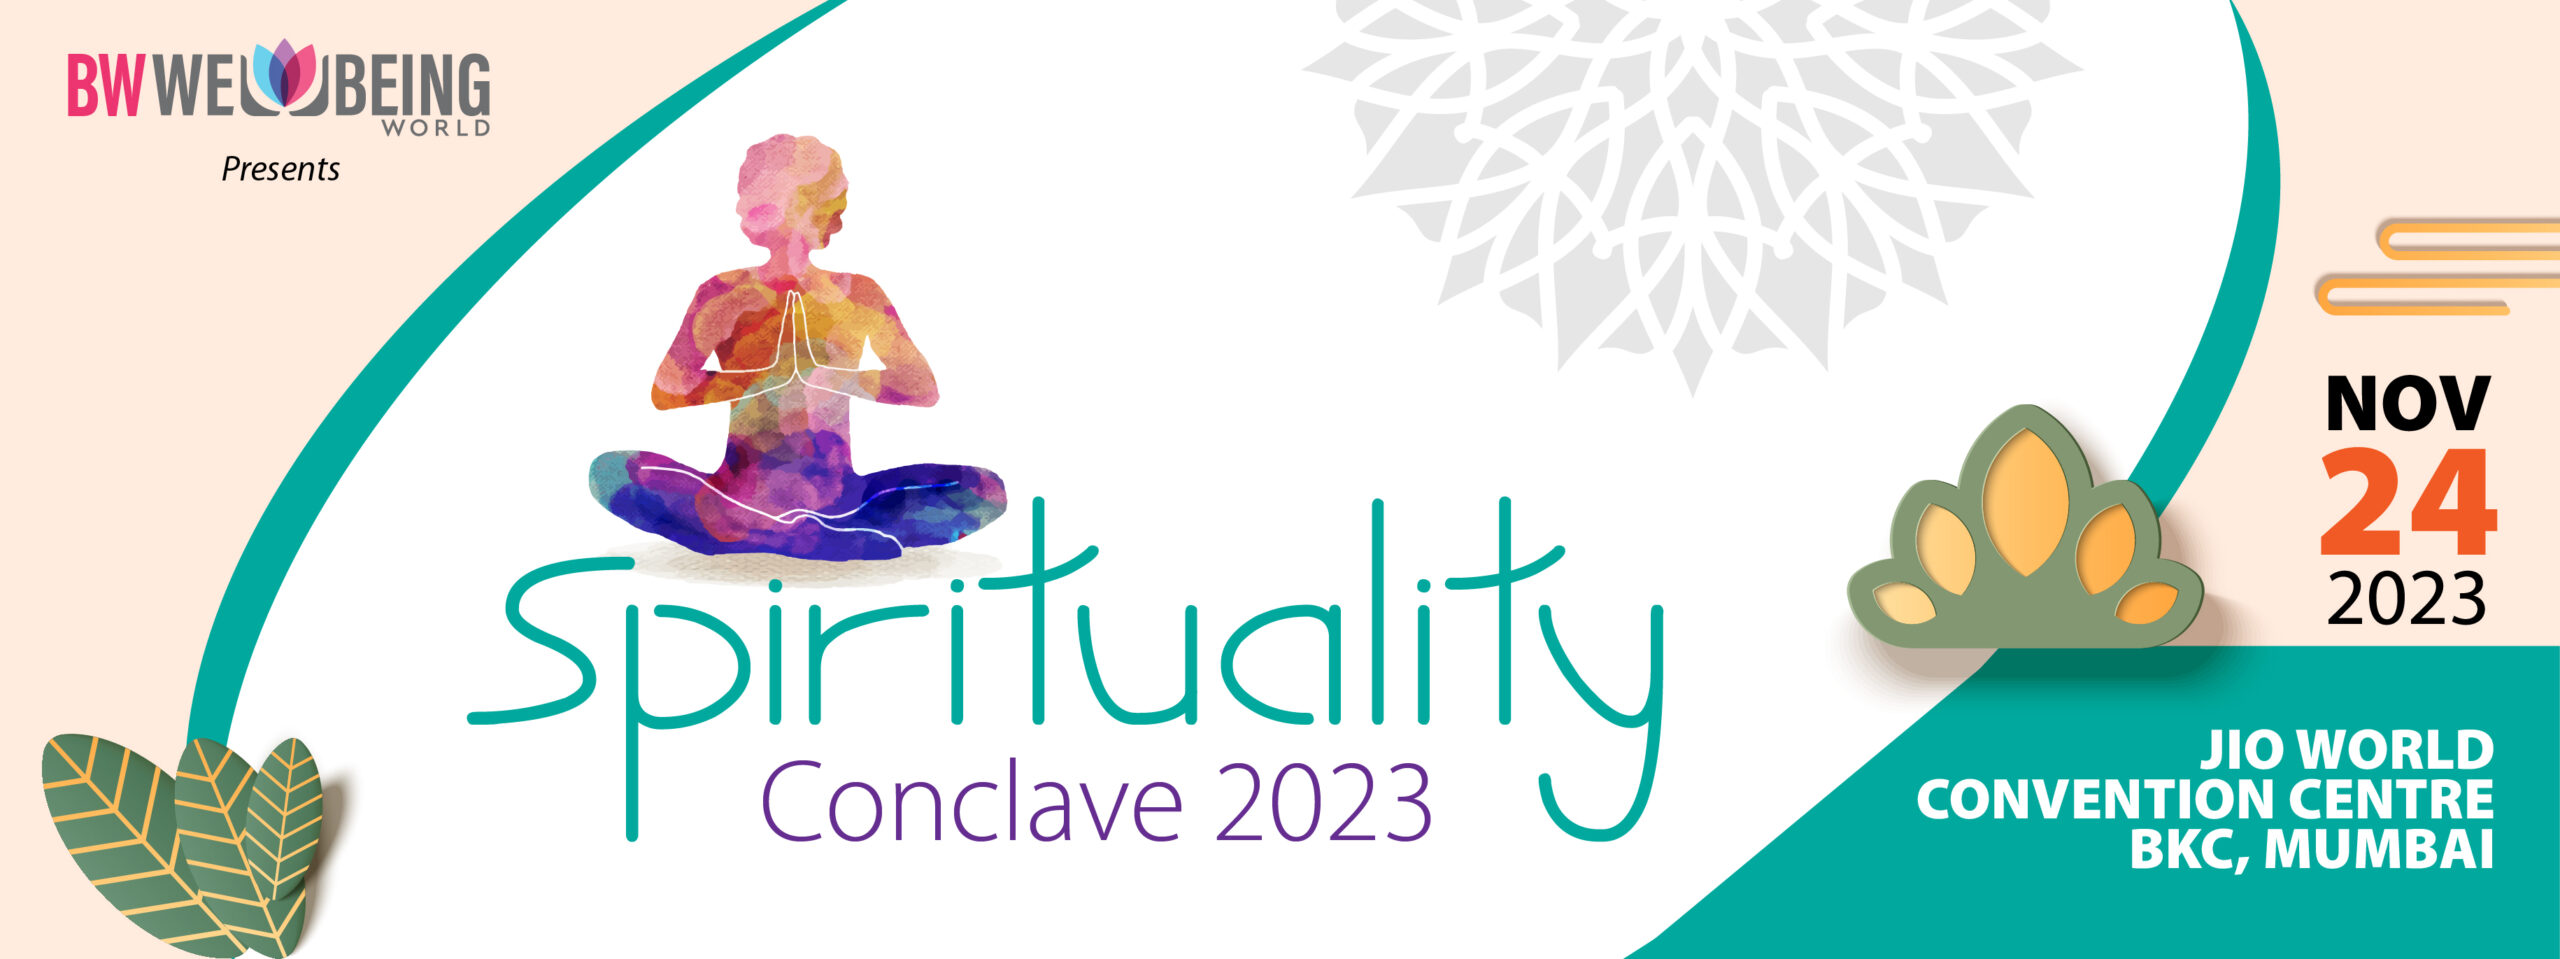 Spirituality Conclave Web_Banners